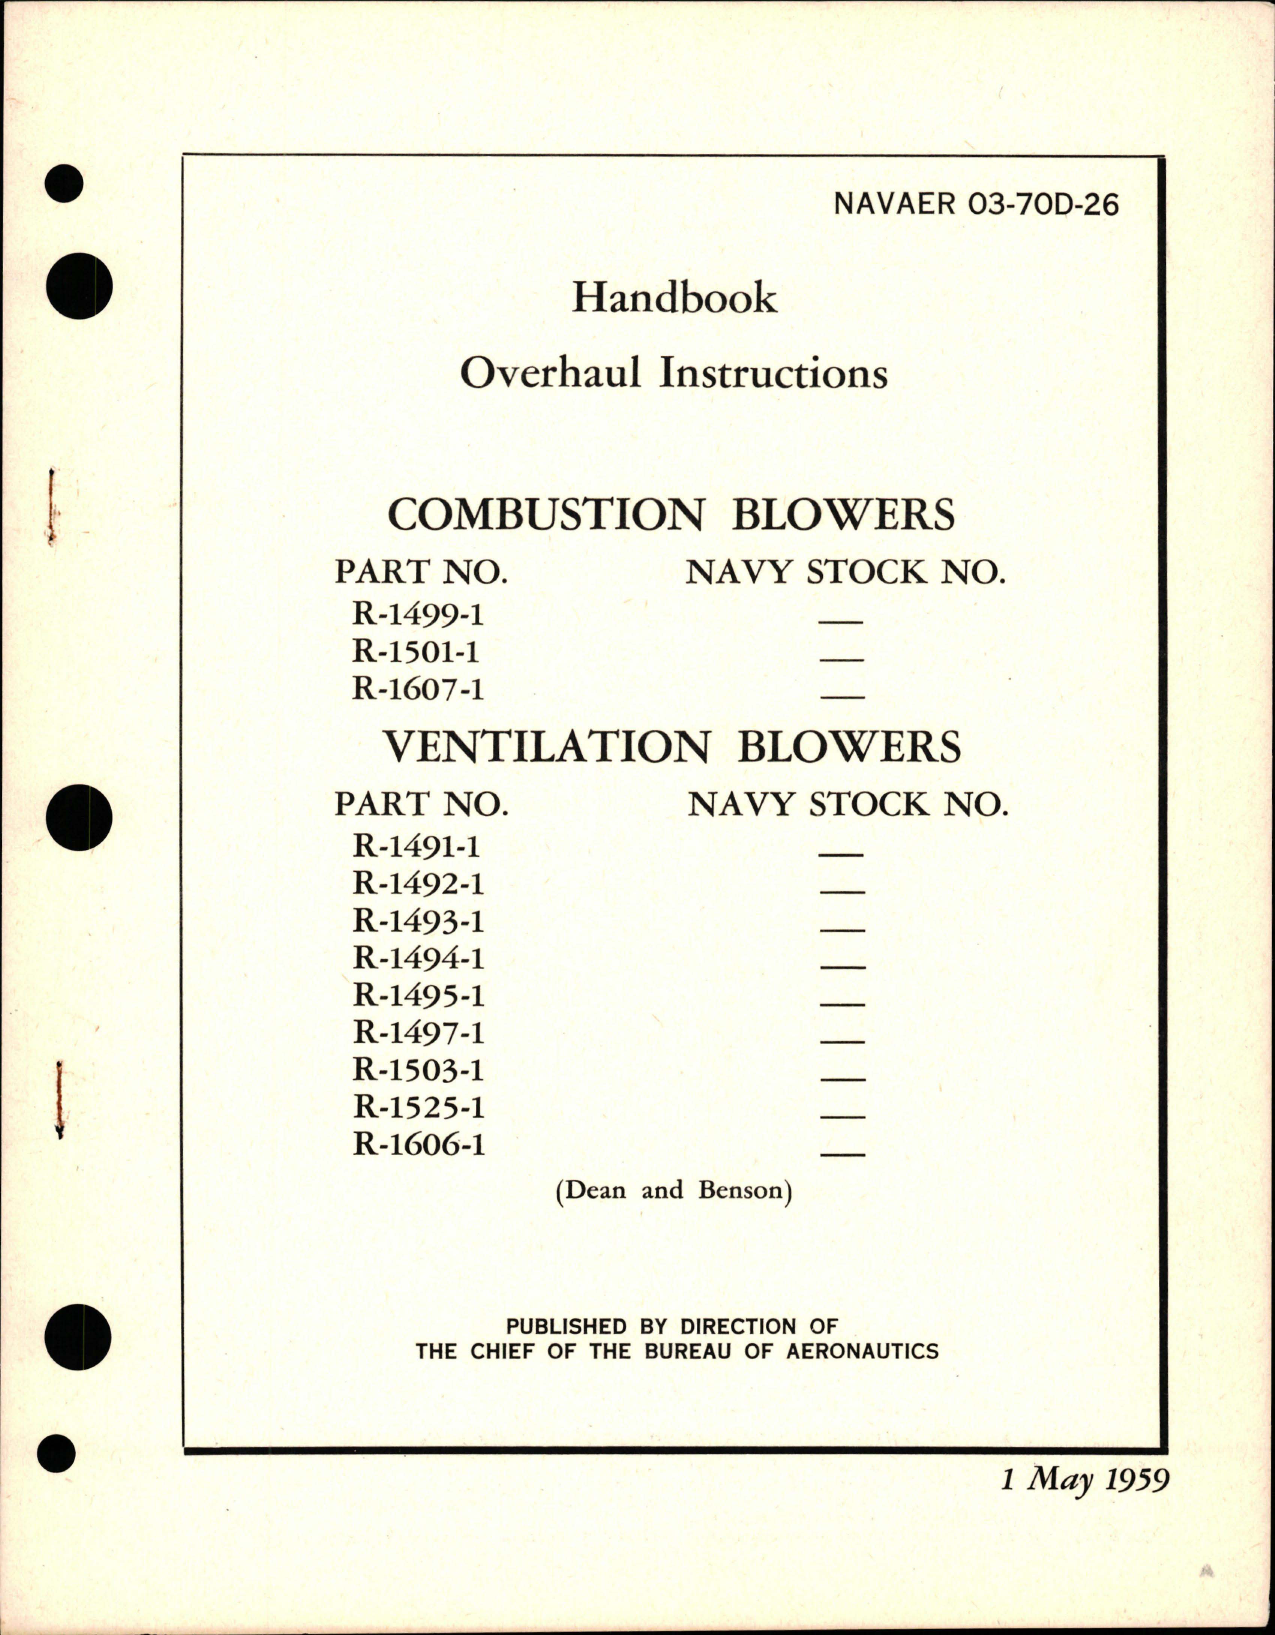 Sample page 1 from AirCorps Library document: Overhaul Instructions for Combustion and Ventilation Blowers